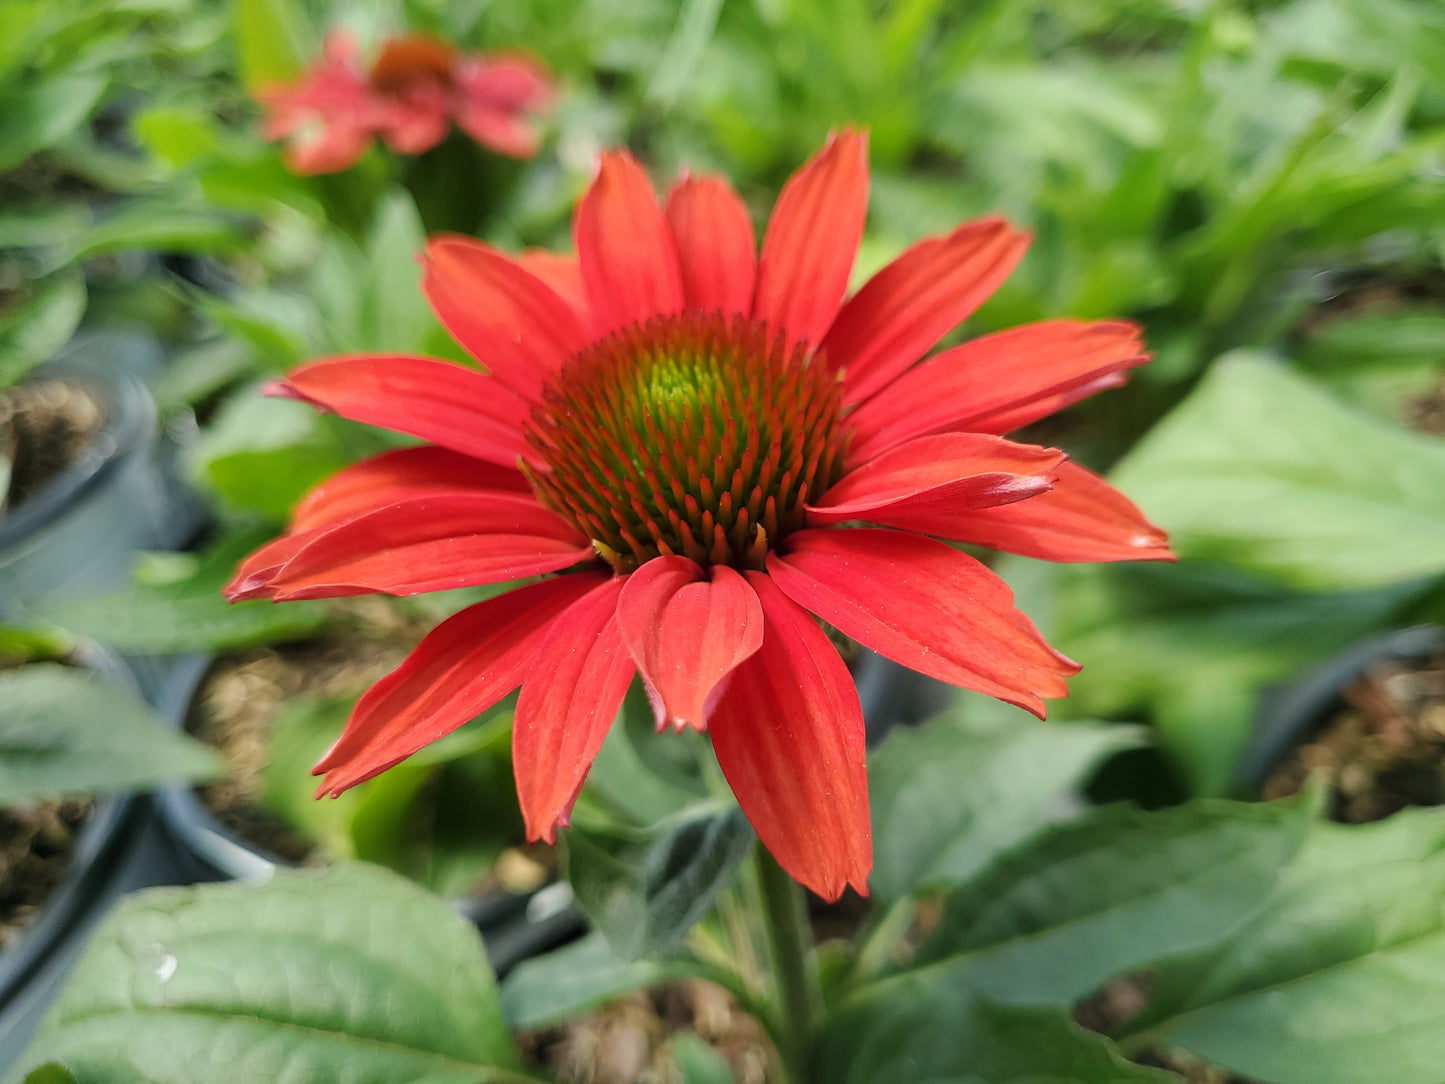 Frankly Scarlet Coneflower